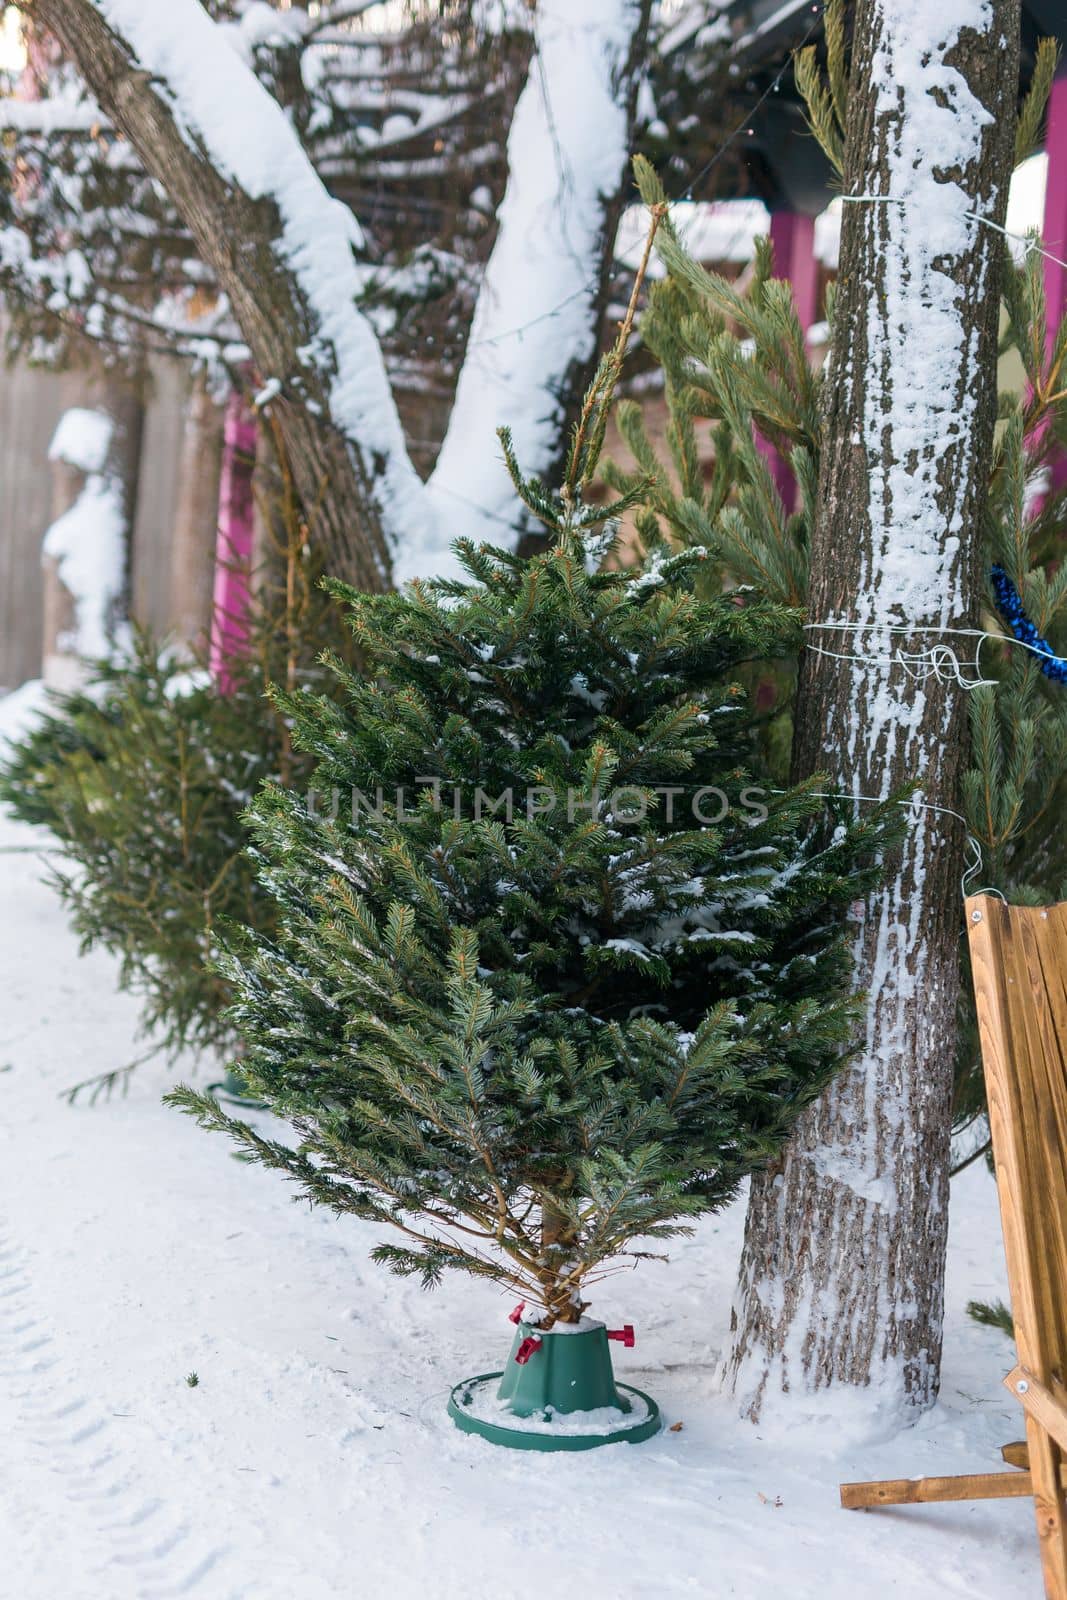 Christmas trees and spruce xmas branches for decoration in farm market for sale in winter holiday season by Satura86